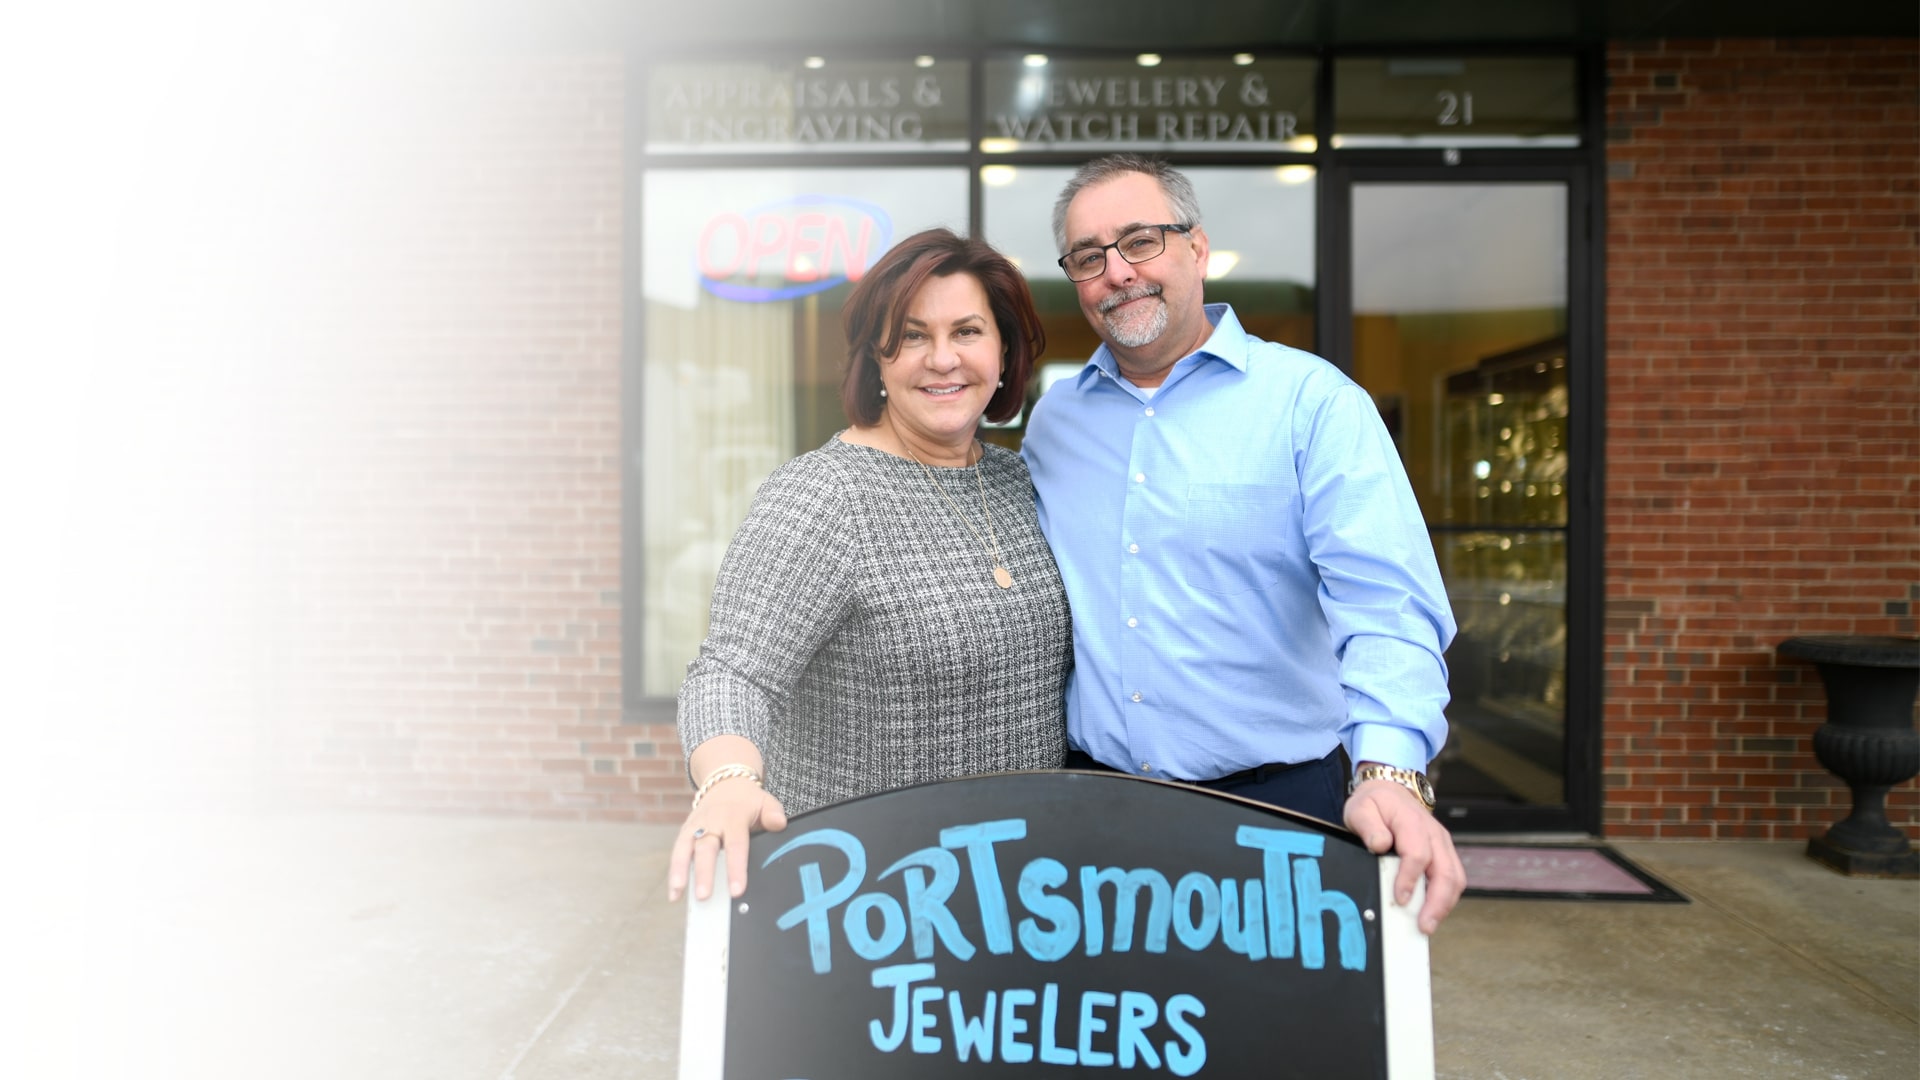 From left to right, Lisa Poisson, wearing a tweed suit and jewelry, and Leo Poisson, wearing a light navy blue shirt, dress pants, and a watch, smiling as they pose in front of the entrance to Portsmouth Jewelers.